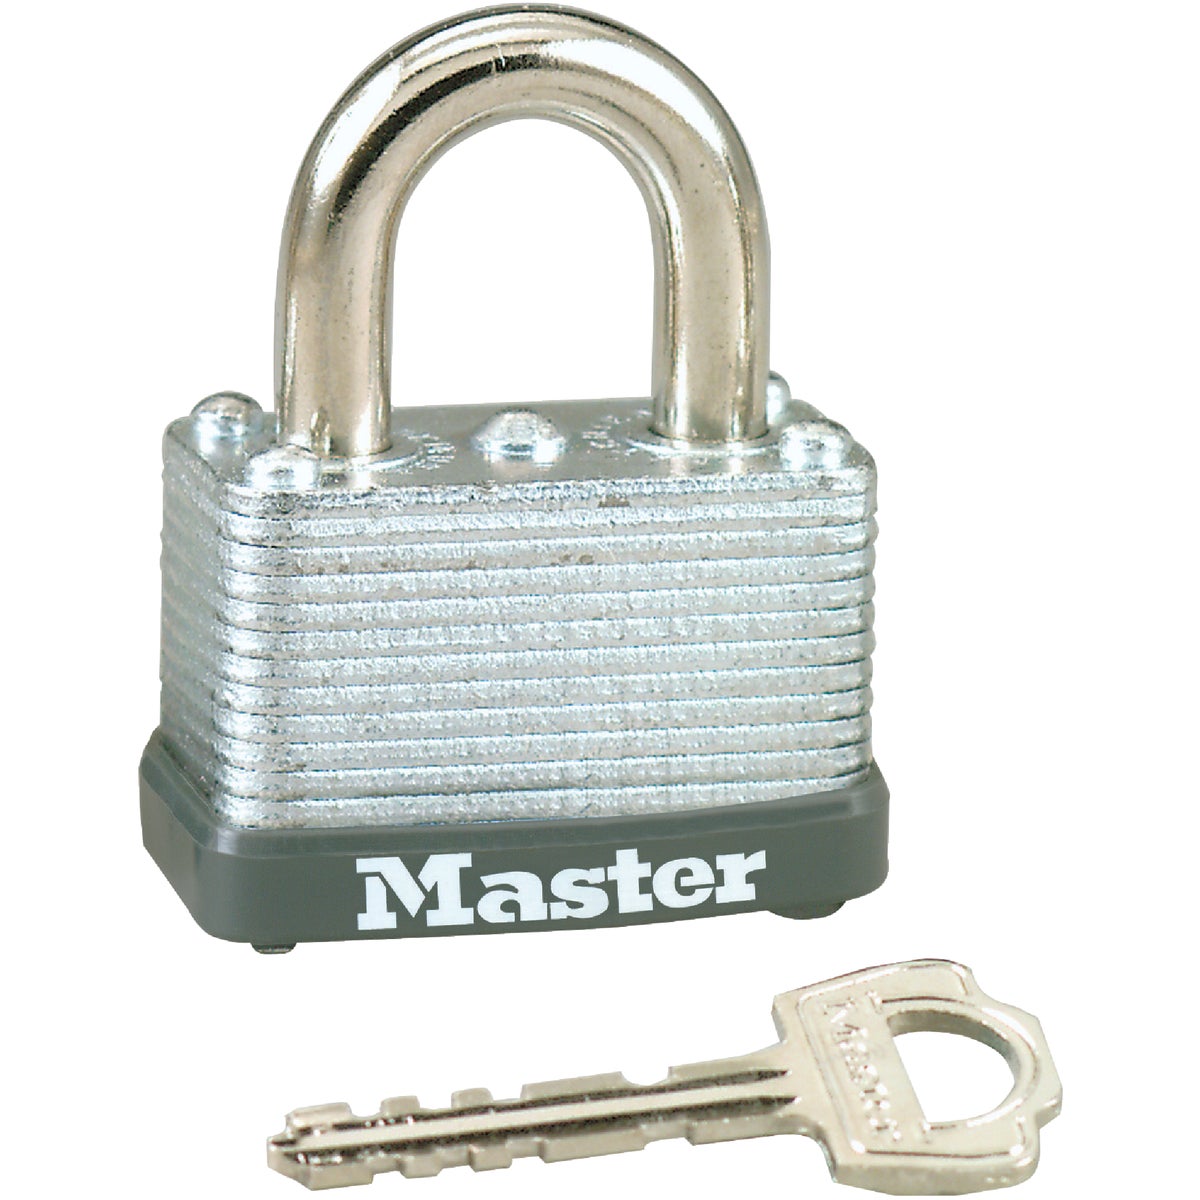 Master Lock 1-1/2 In. W. Warded Keyed Different Padlock